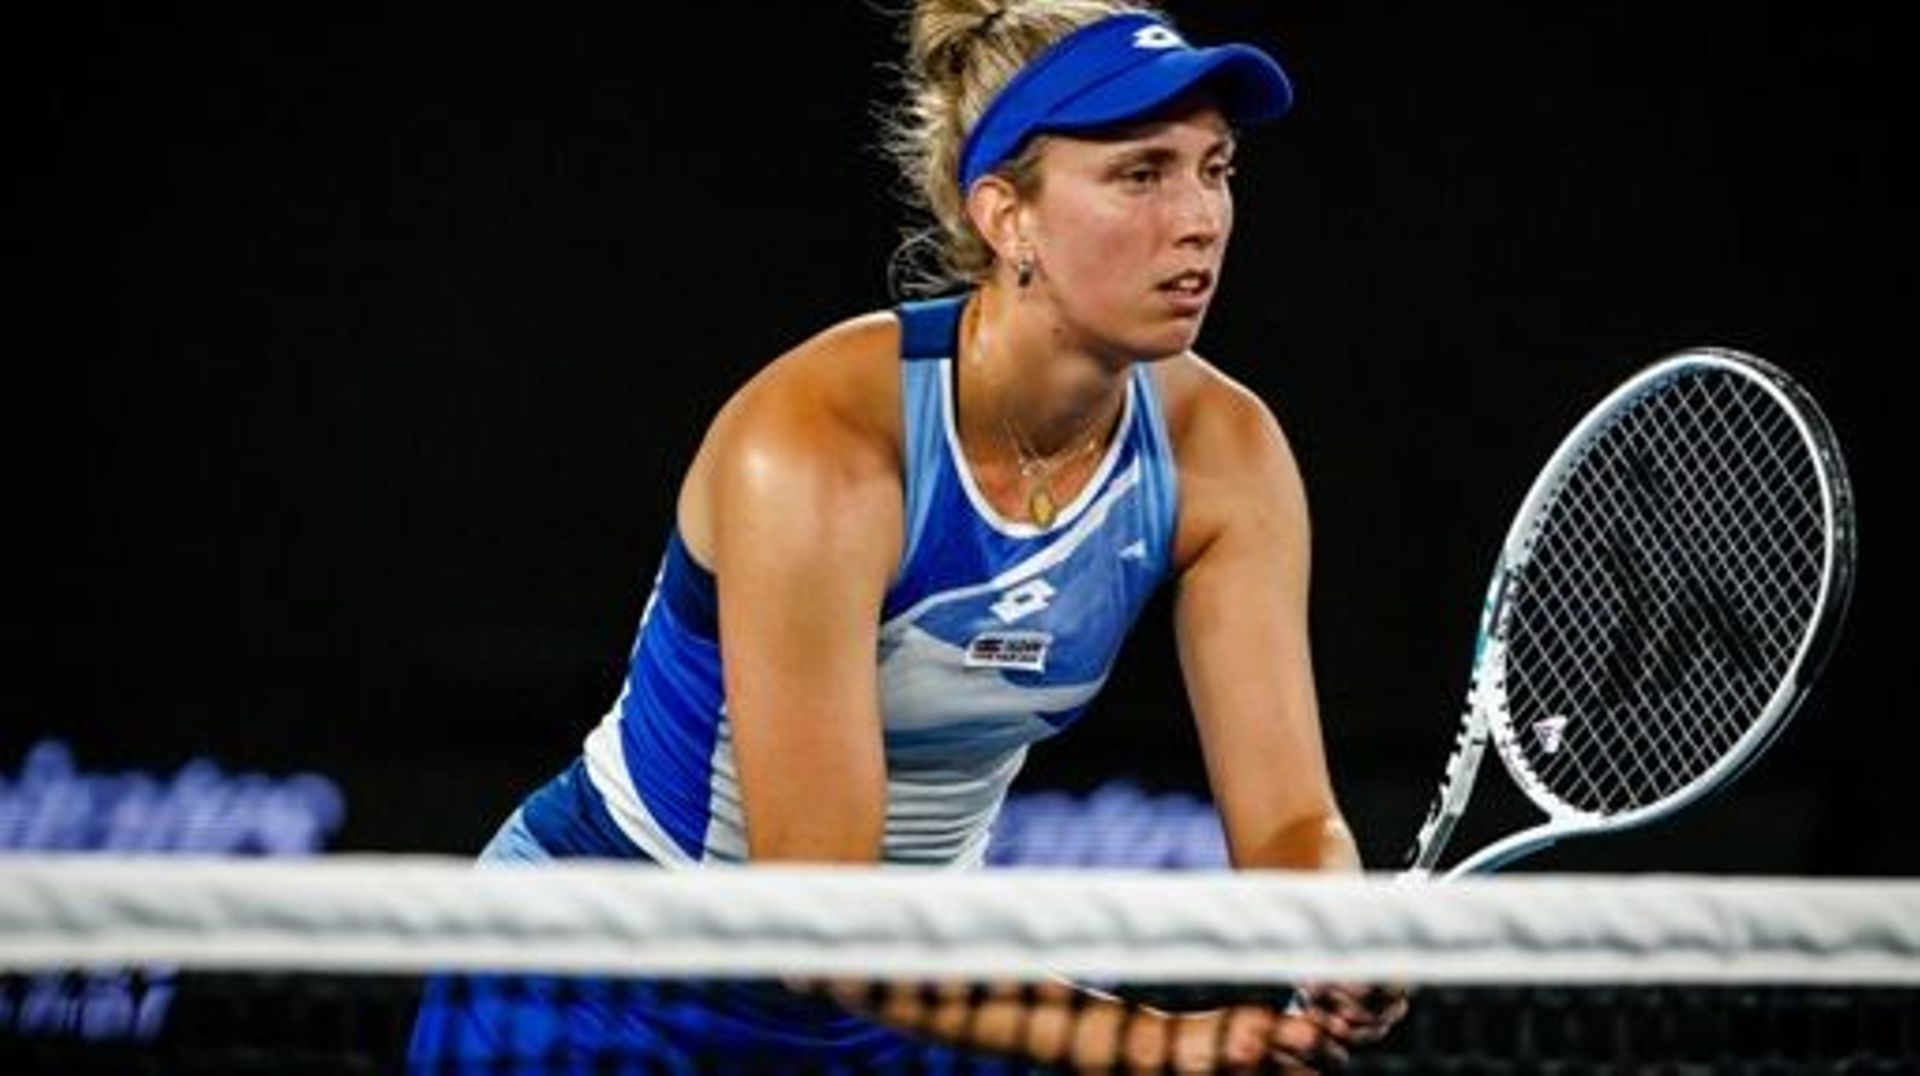 Elise Mertens (WTA 4)  pictured during a women's doubles third round game between Belgian-Us pair Mertens-Hunter and Swiss-Romanian pair Golubic-Niculescu at the 'Australian Open' tennis Grand Slam, Monday 23 January 2023 in Melbourne Park, Melbourne, Aus